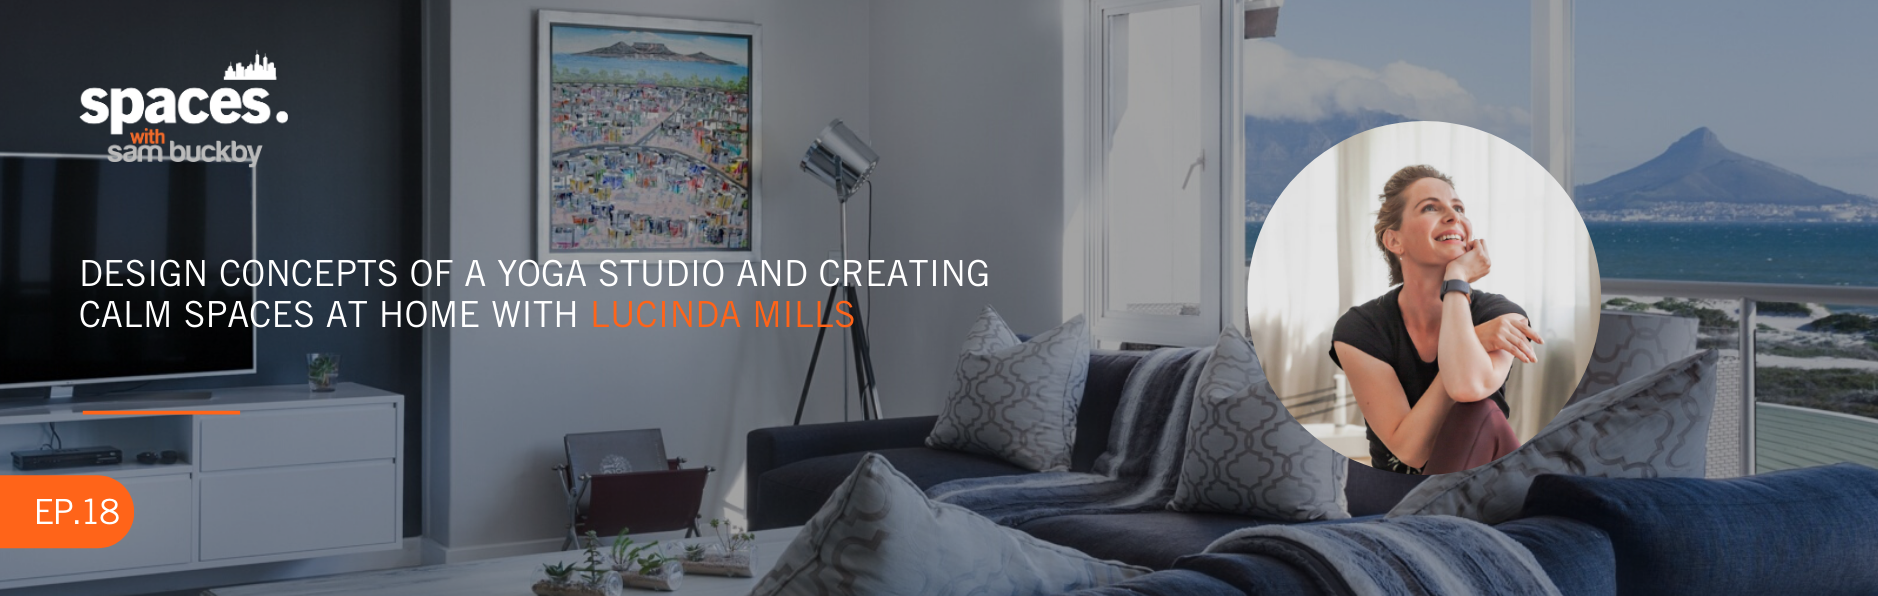 Episode 18. Design concepts of a yoga studio and creating calm spaces at home with Lucinda Mills